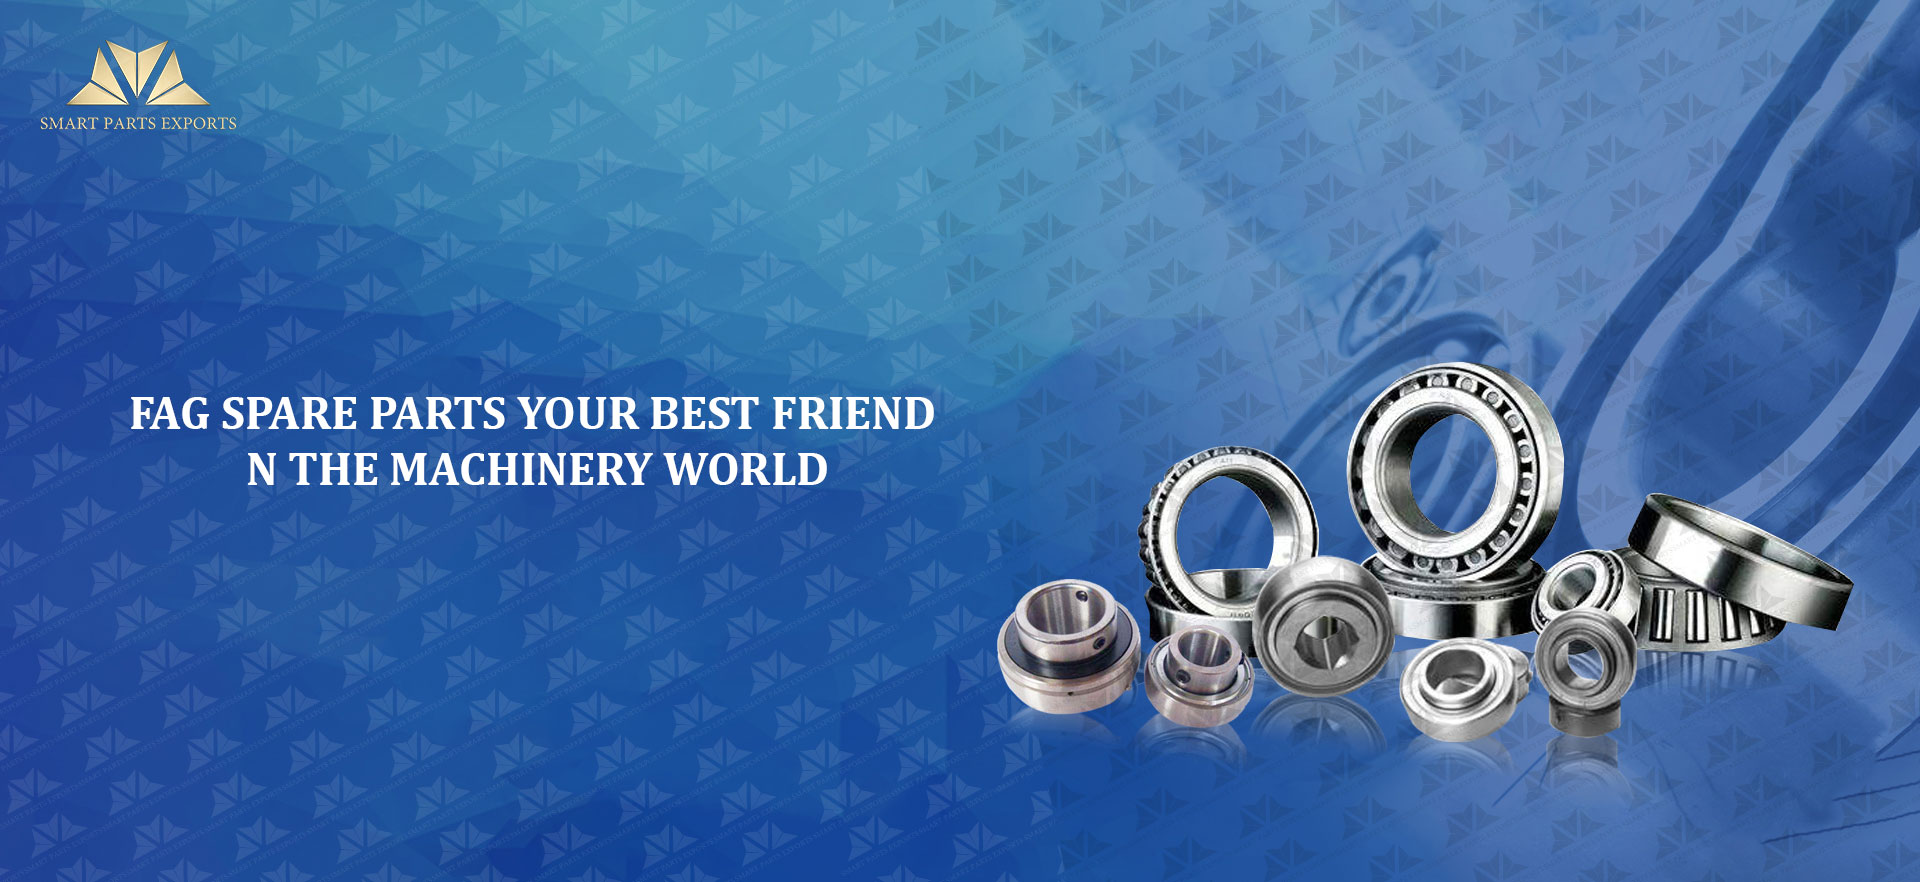 Buy FAG Spare Parts, Bearing online from Smart Parts Exports